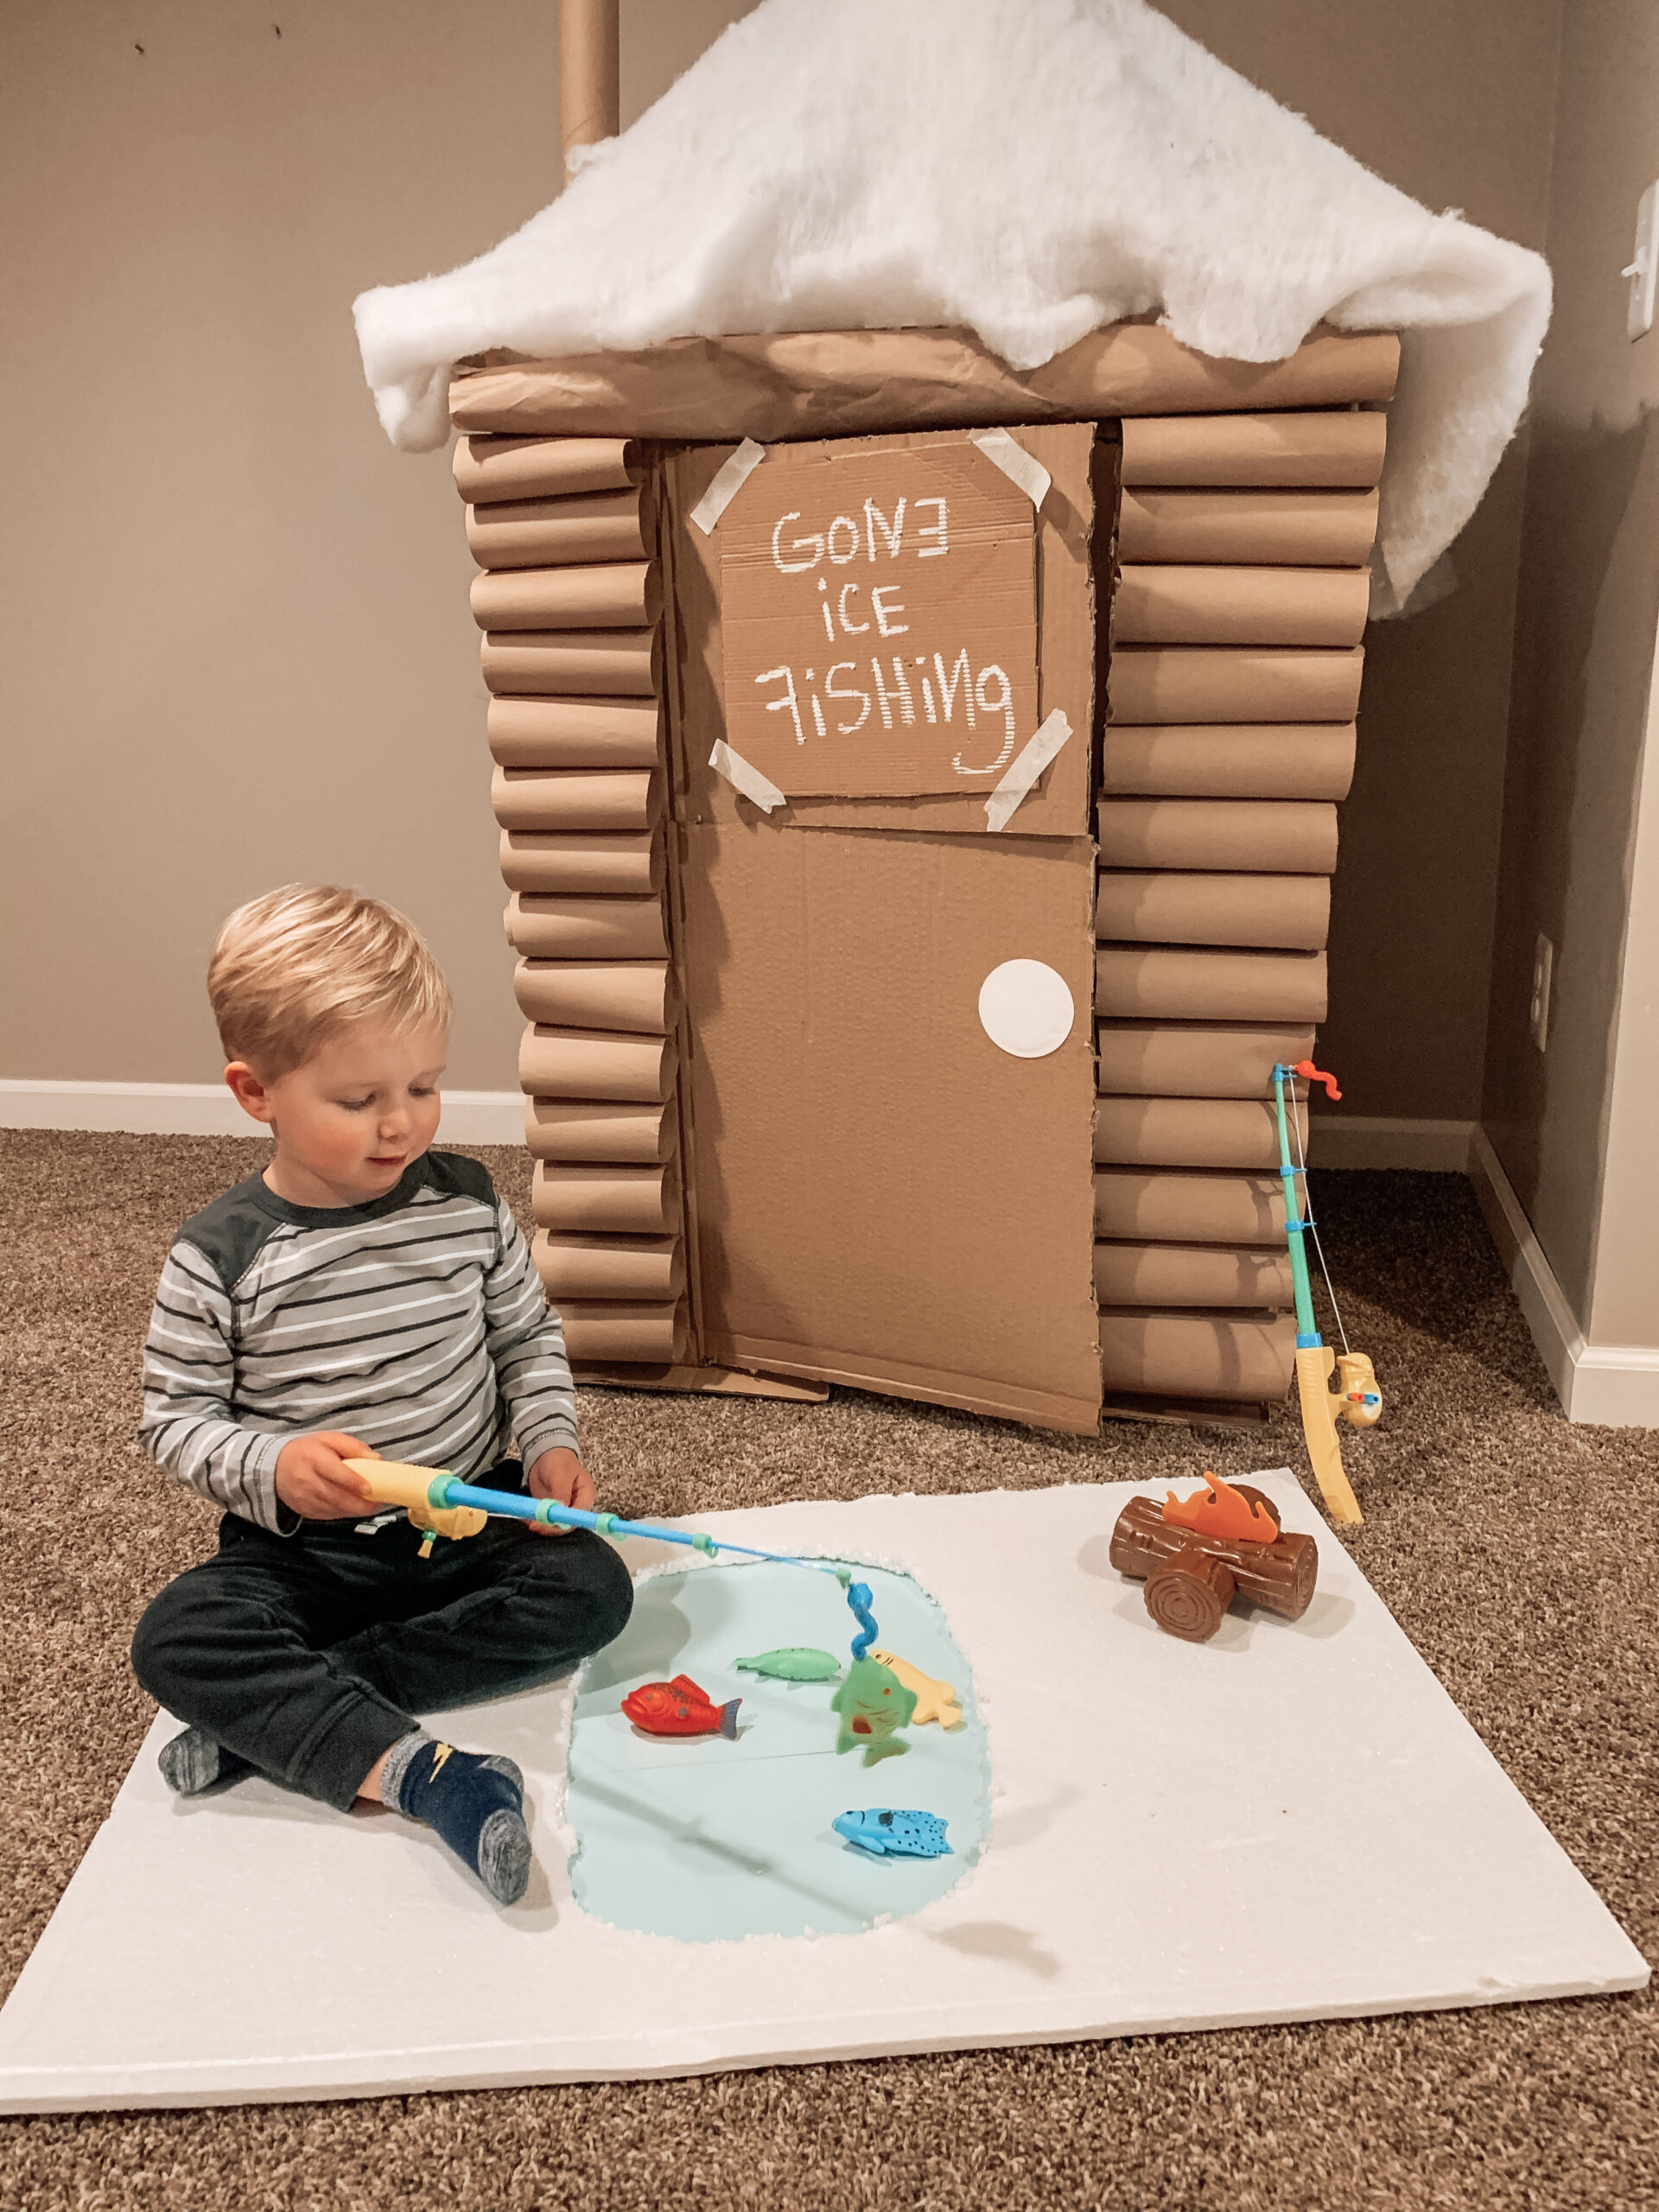 Kid playing with a repurposed cardboard box ice fishing cabin and pretending to fish on packing foam ice